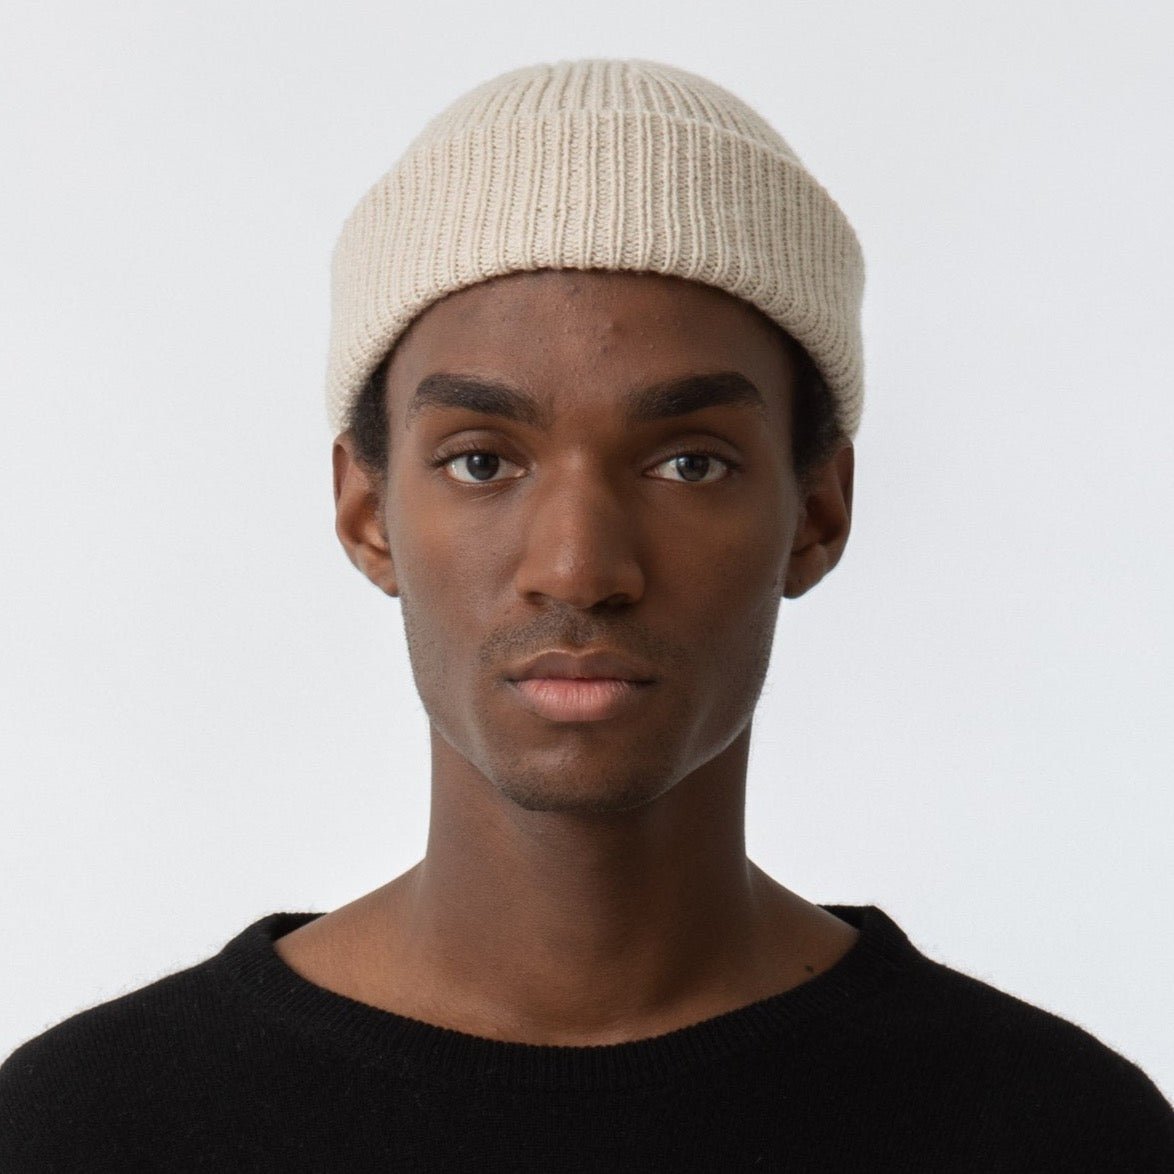 A model wears a rolled up cream colored knitted and cuffed hat with a decrease detail on top. The Merino Rib Hat in Almond White is designed by Dinadi and hand knitted in Kathmandu, Nepal.